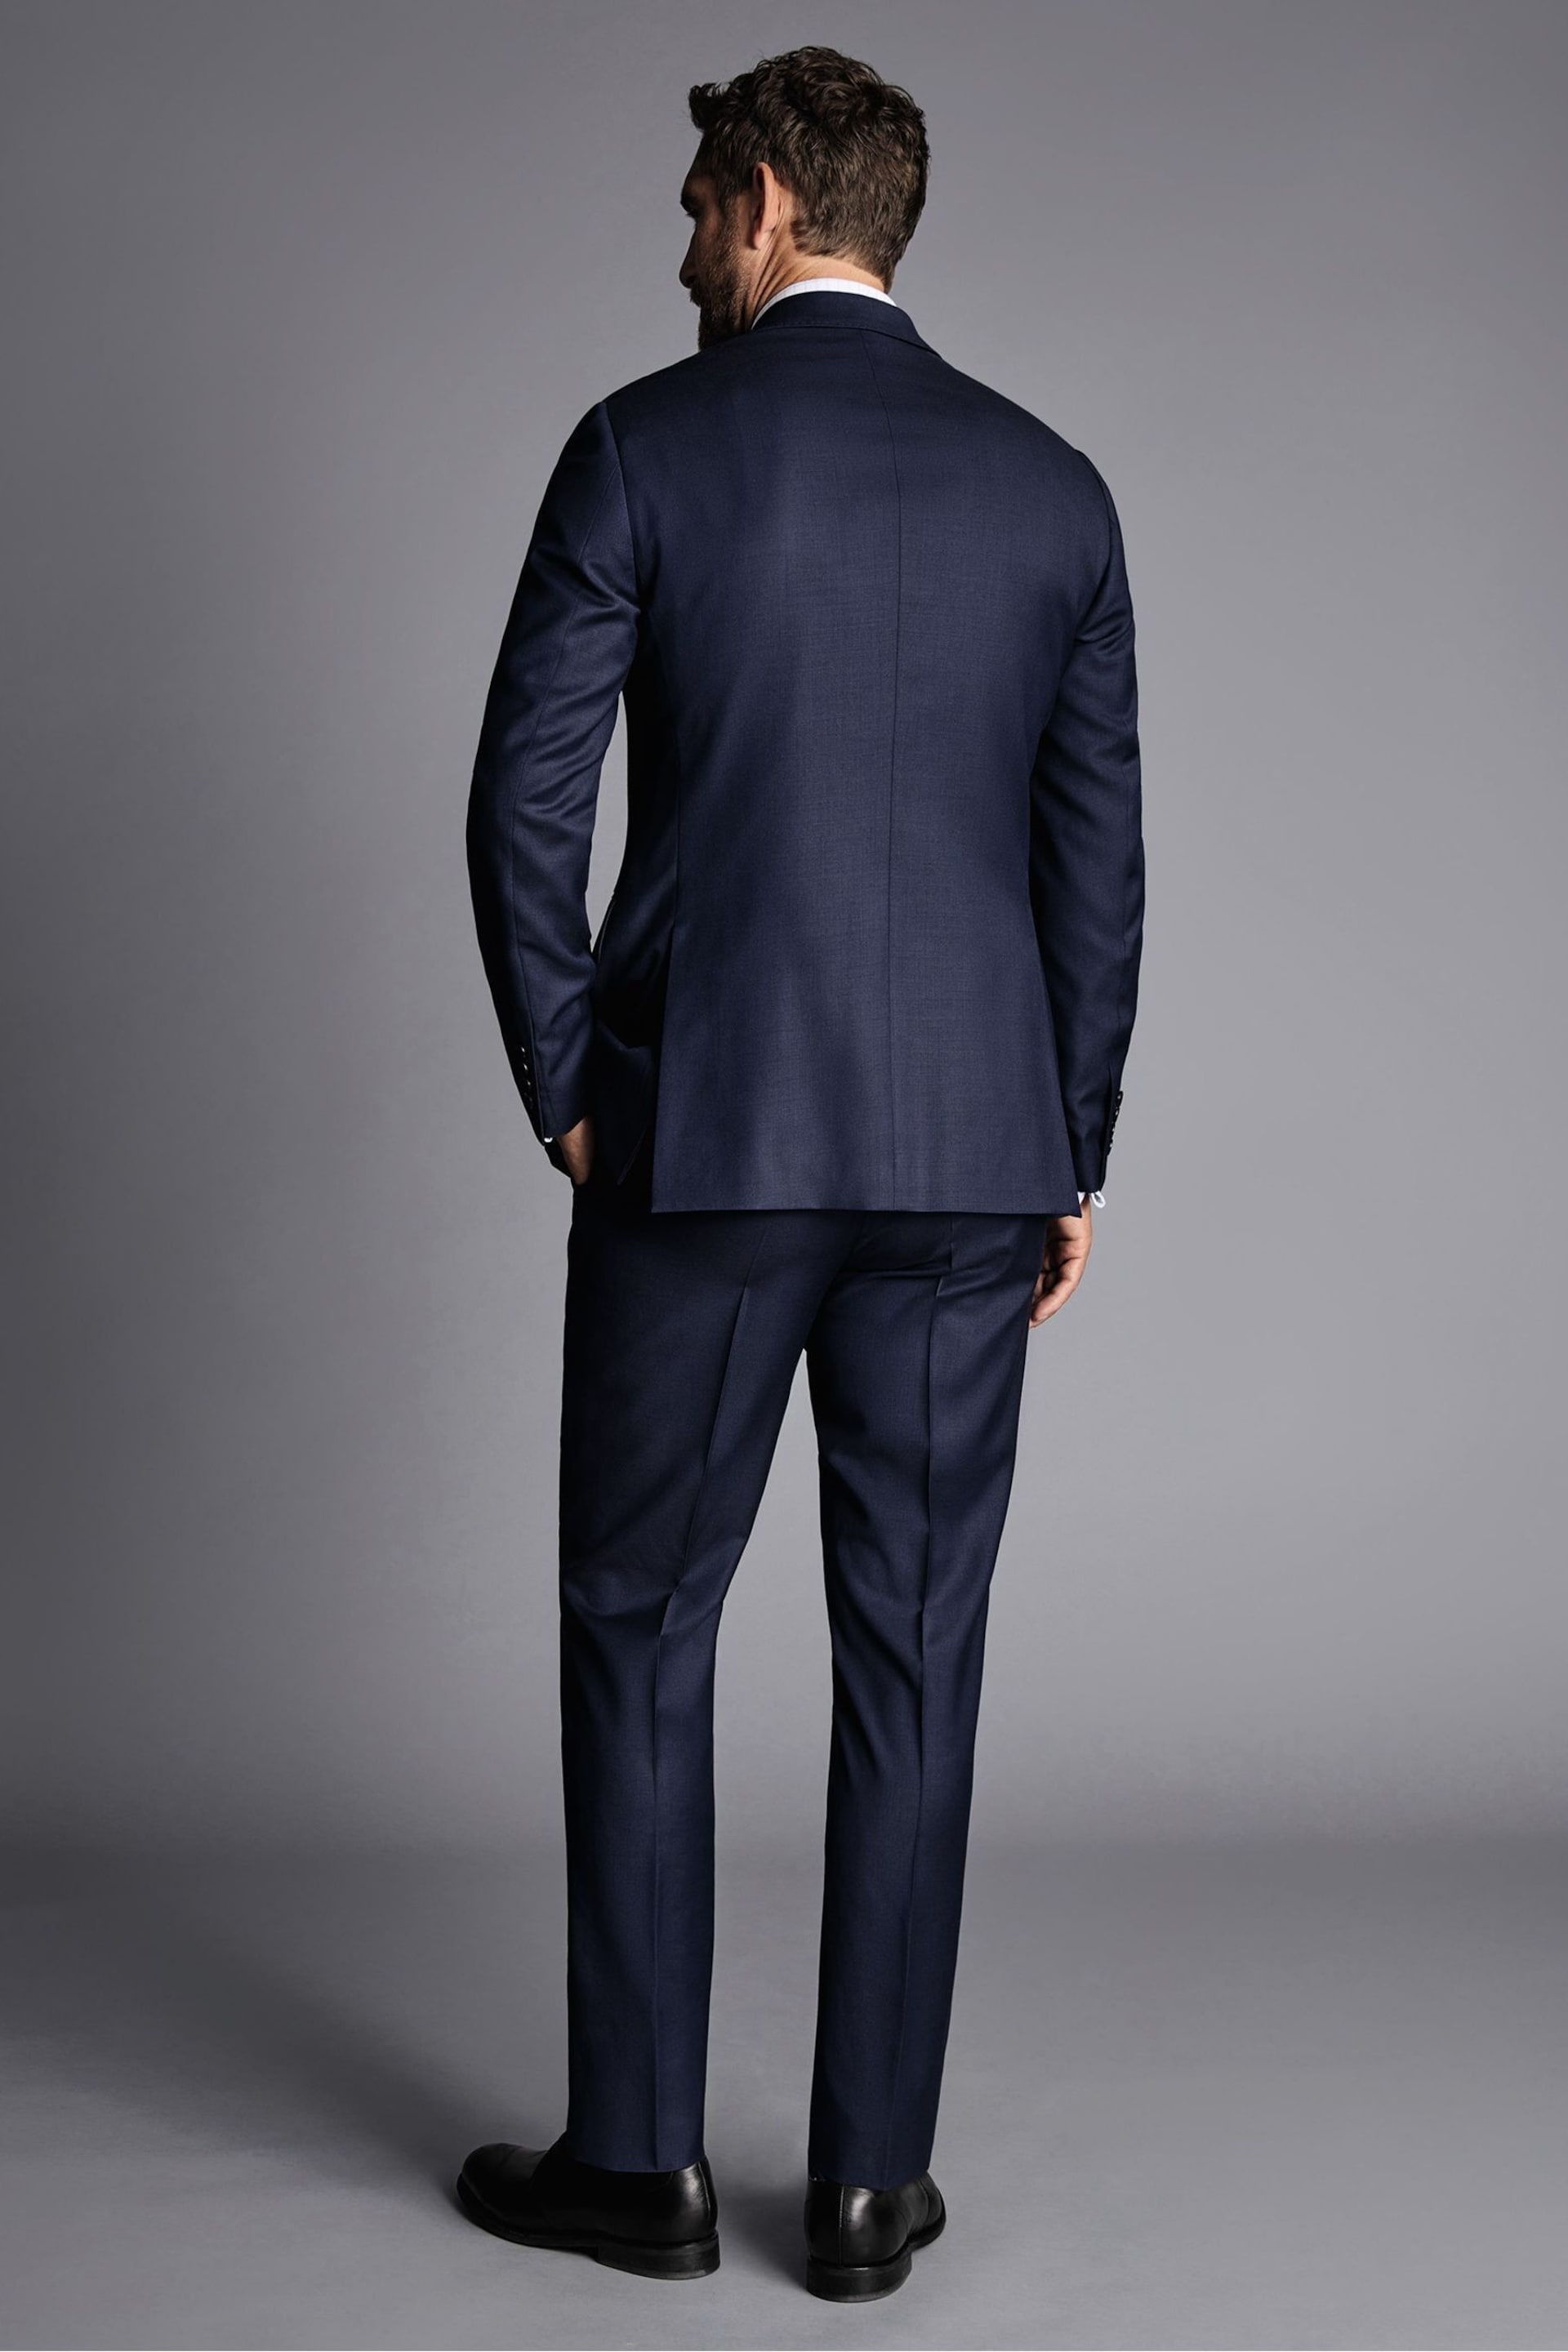 Charles Tyrwhitt Blue Slim Fit Natural Stretch Twill Suit: Jacket - Image 2 of 5